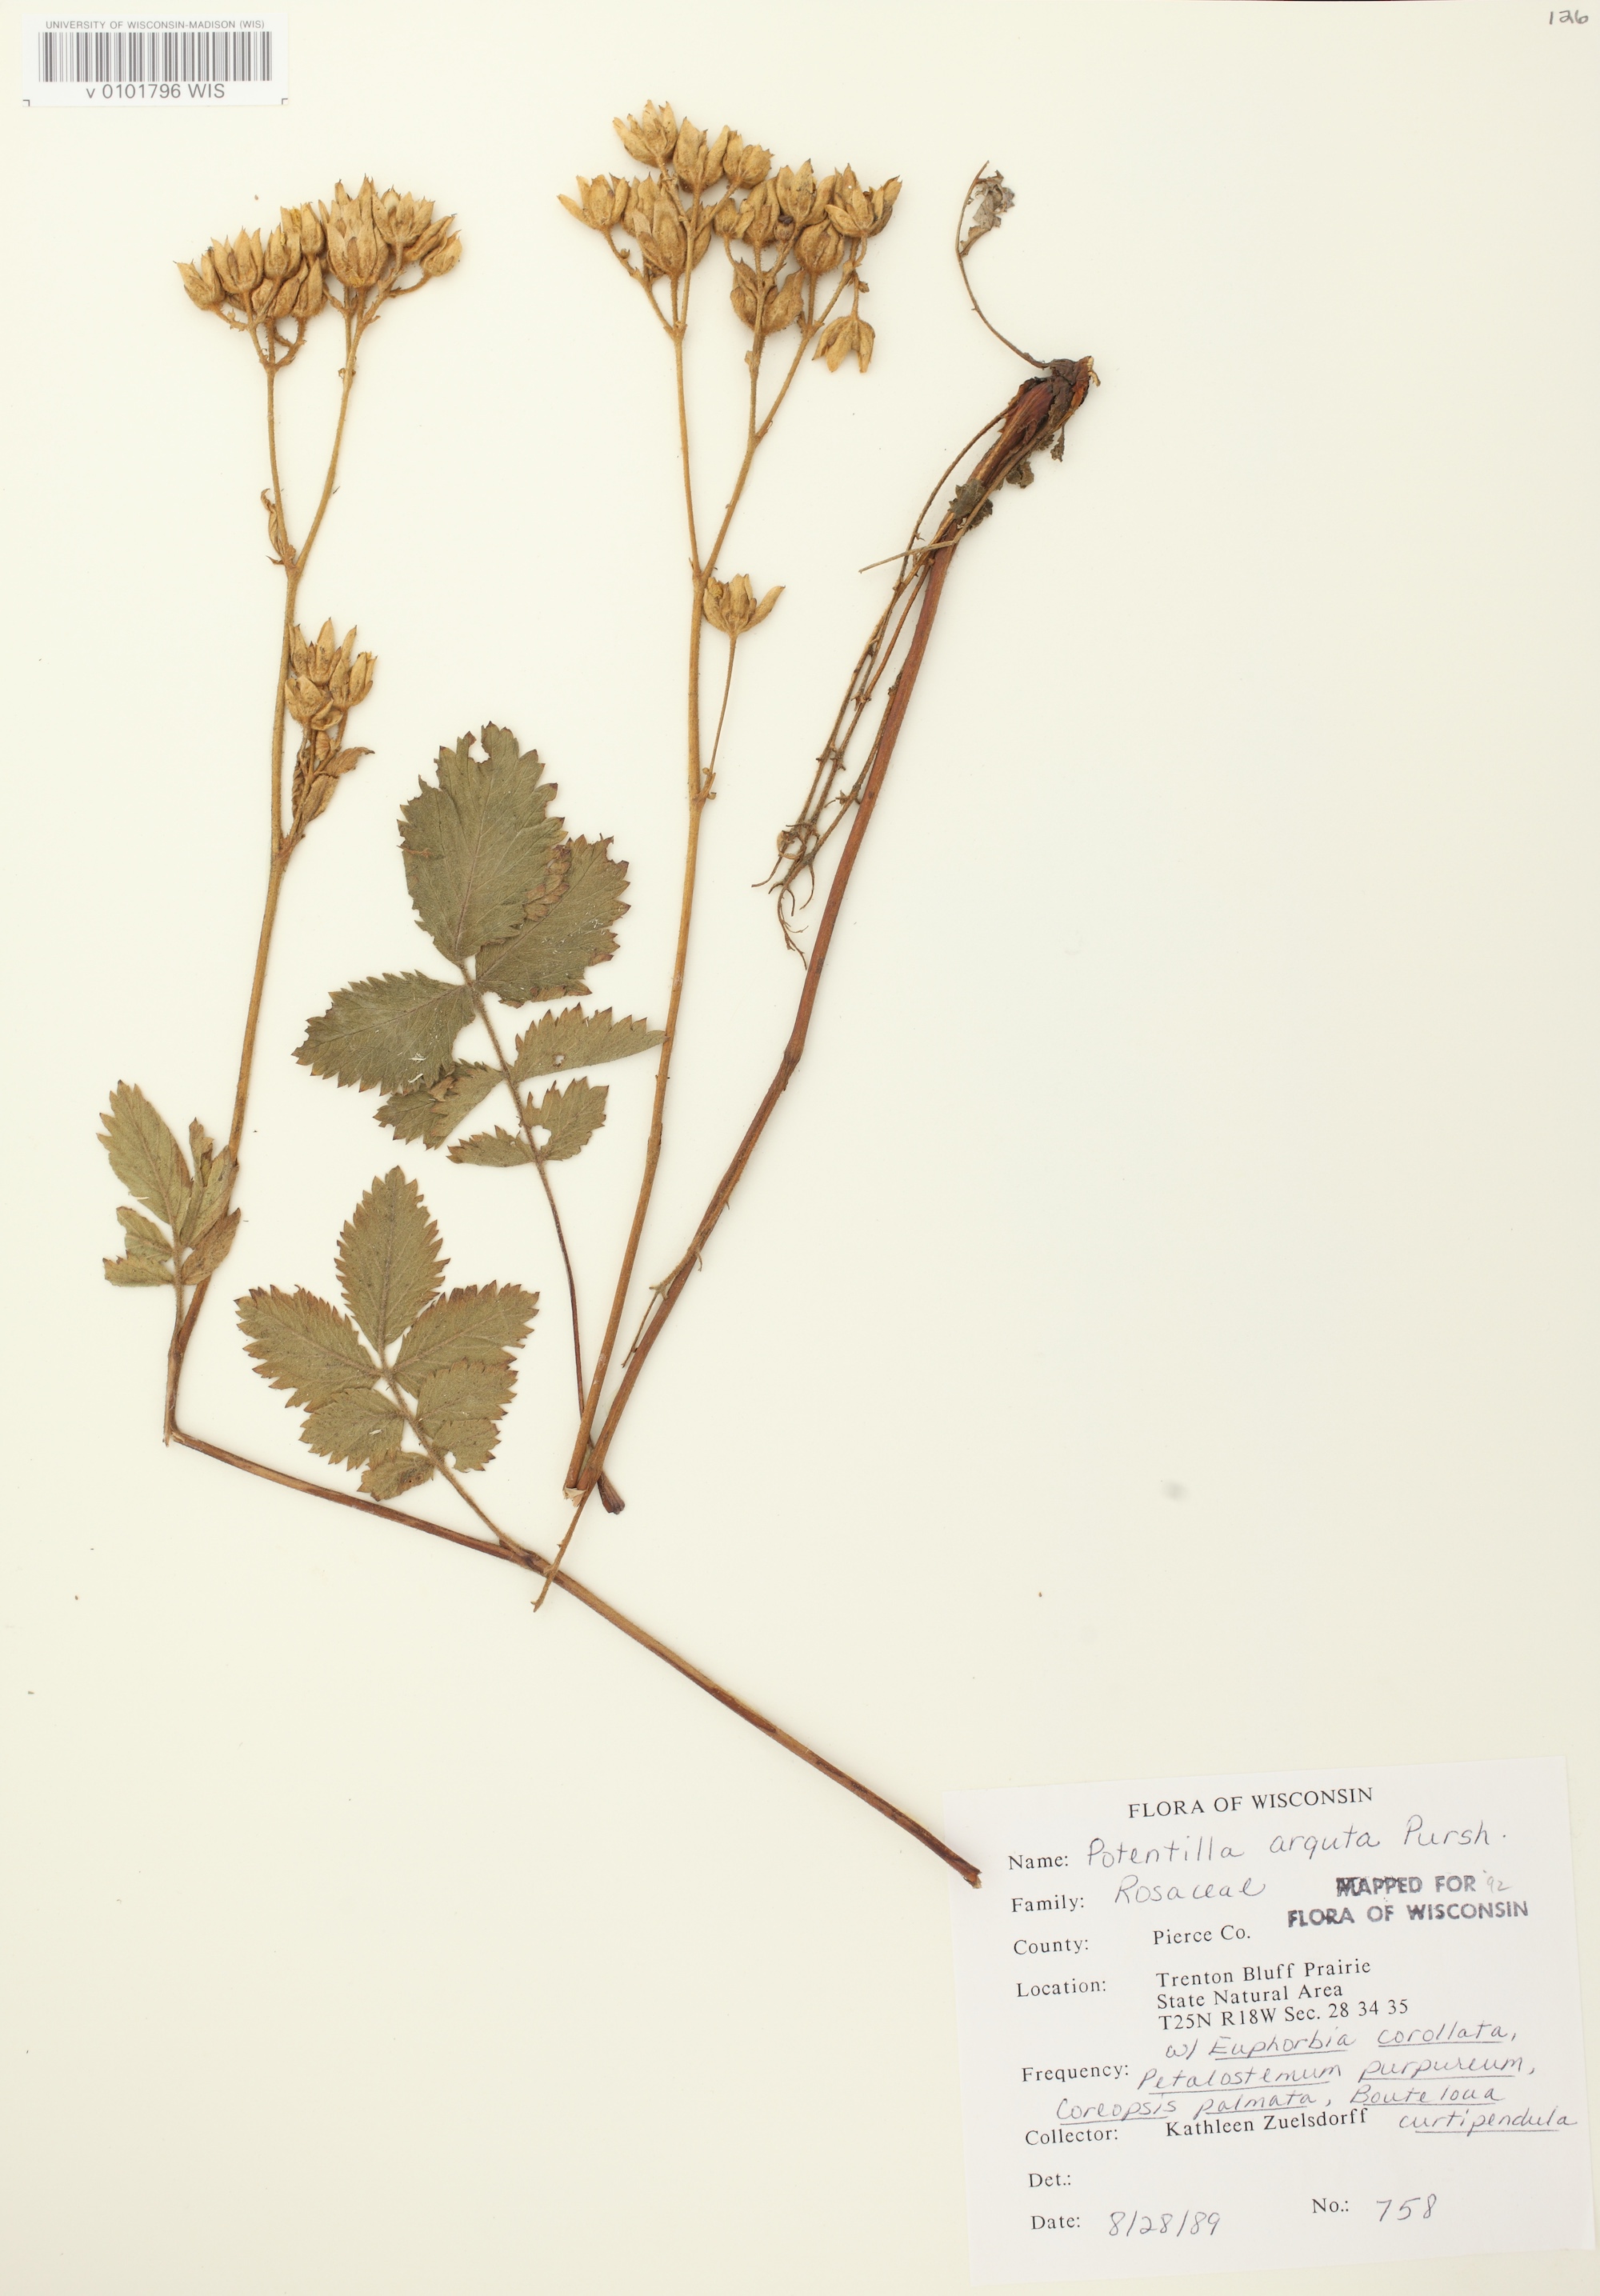 Prairie Cinquefoil specimen collected in Pierce County in the Trenton Bluff Area on August 28, 1989.